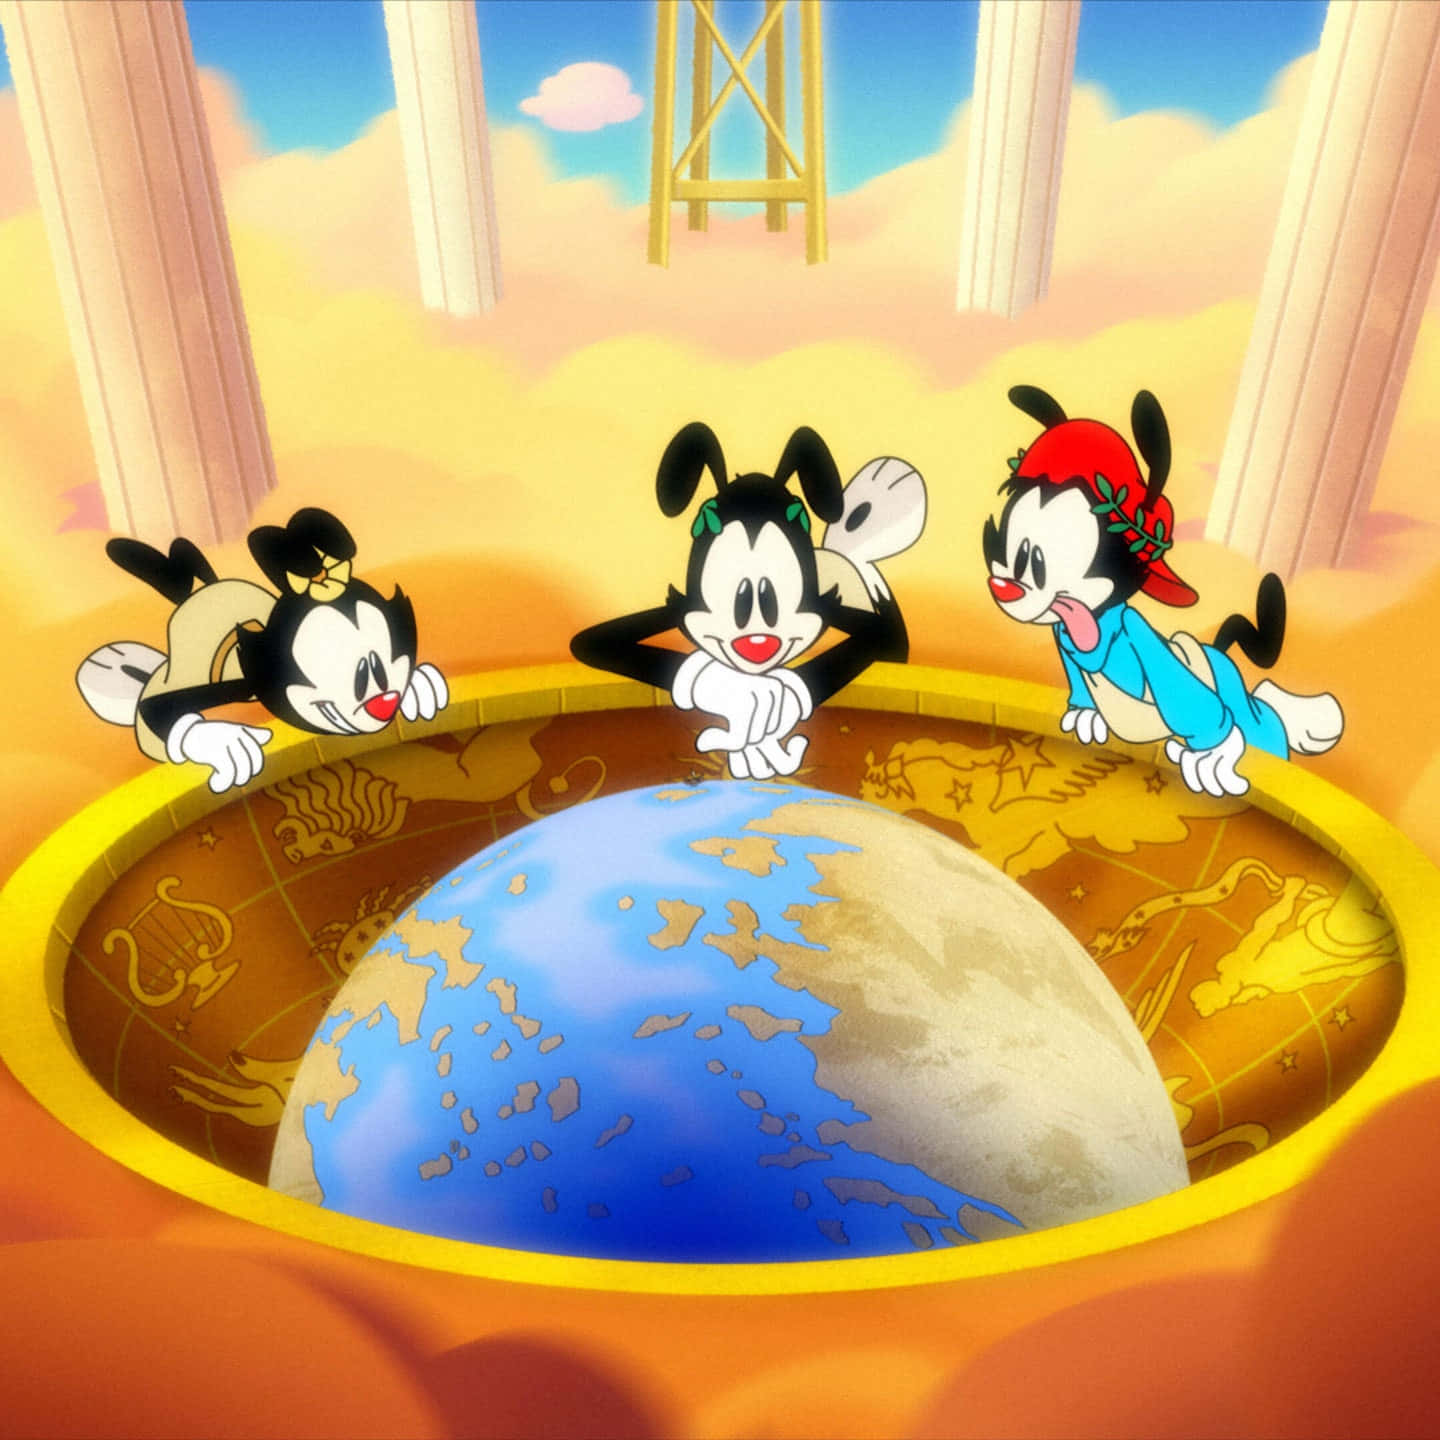 "The Animaniacs make cute, crazy and mischievous adventures!"